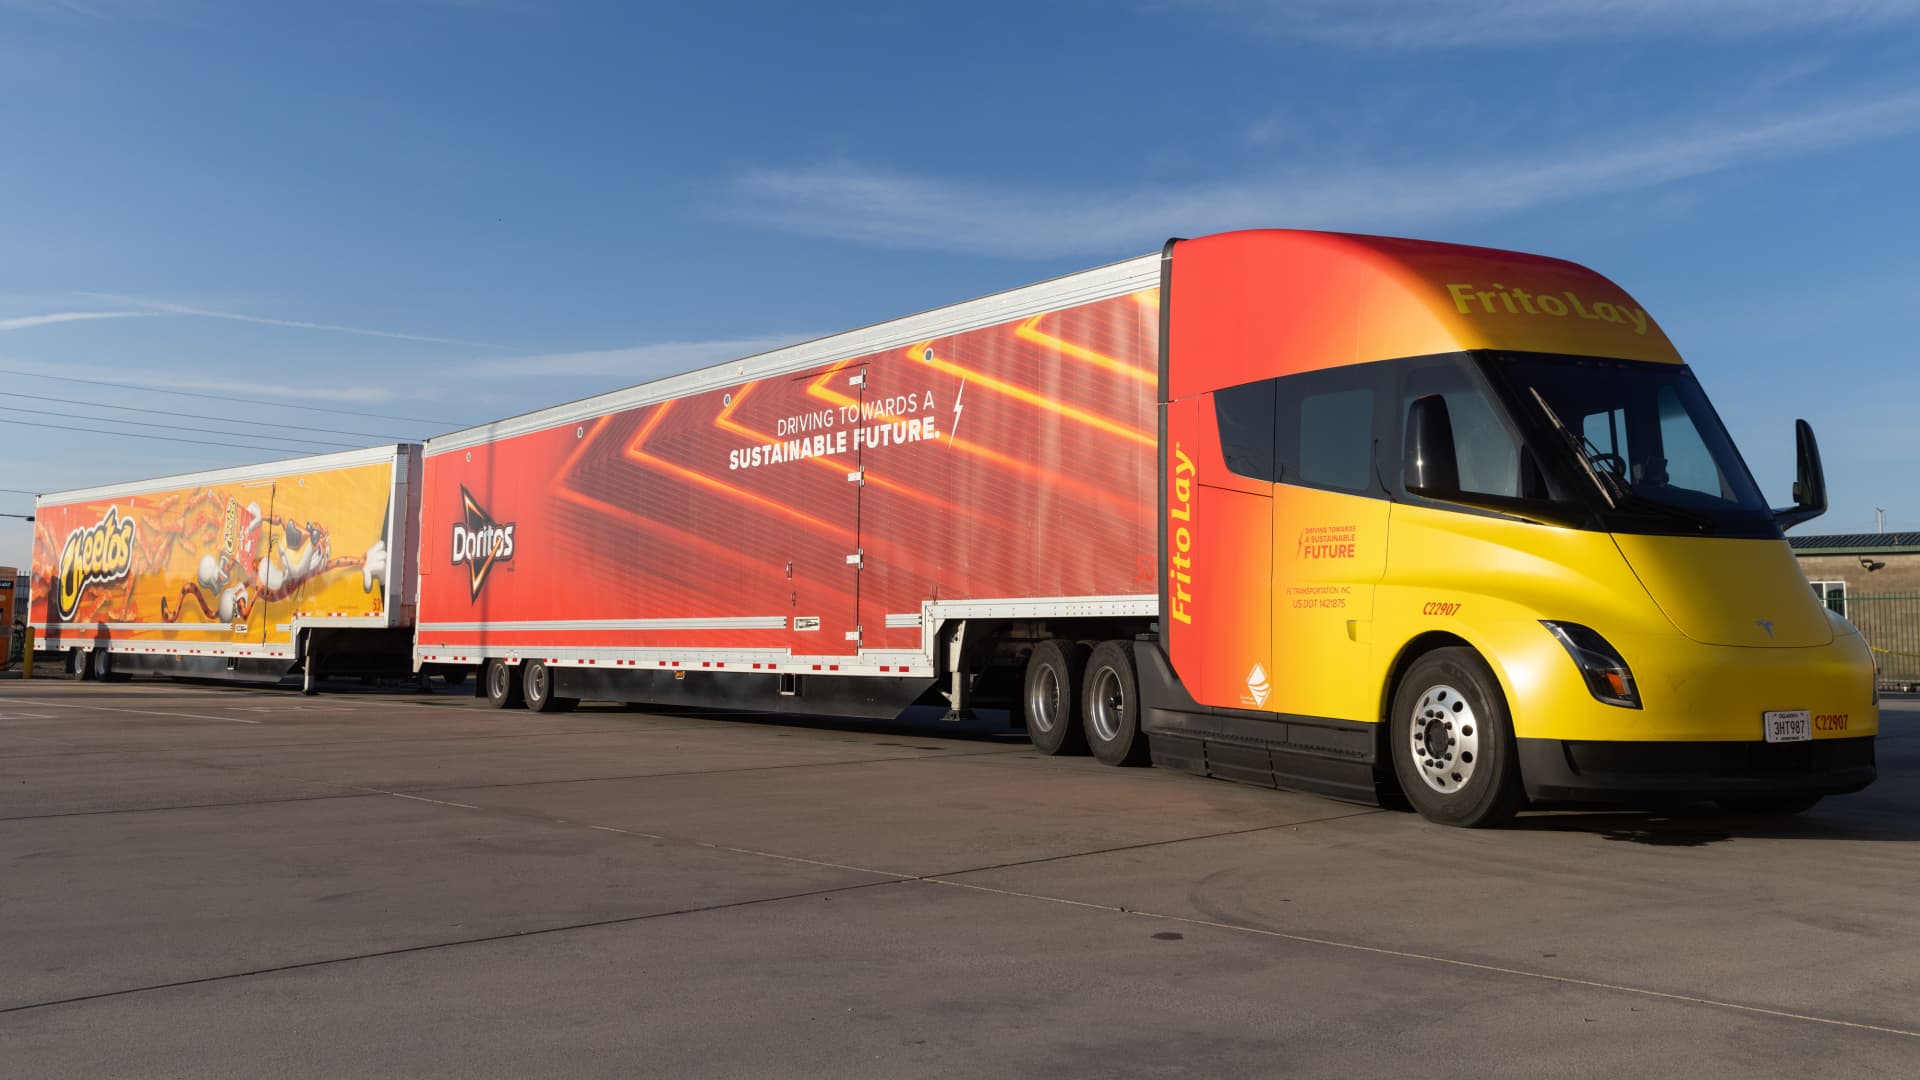 A Tesla Semi electric truck parked outside the Frito-Lay manufacturing facility in Modesto, California, US, on Wednesday, Jan. 18, 2023.